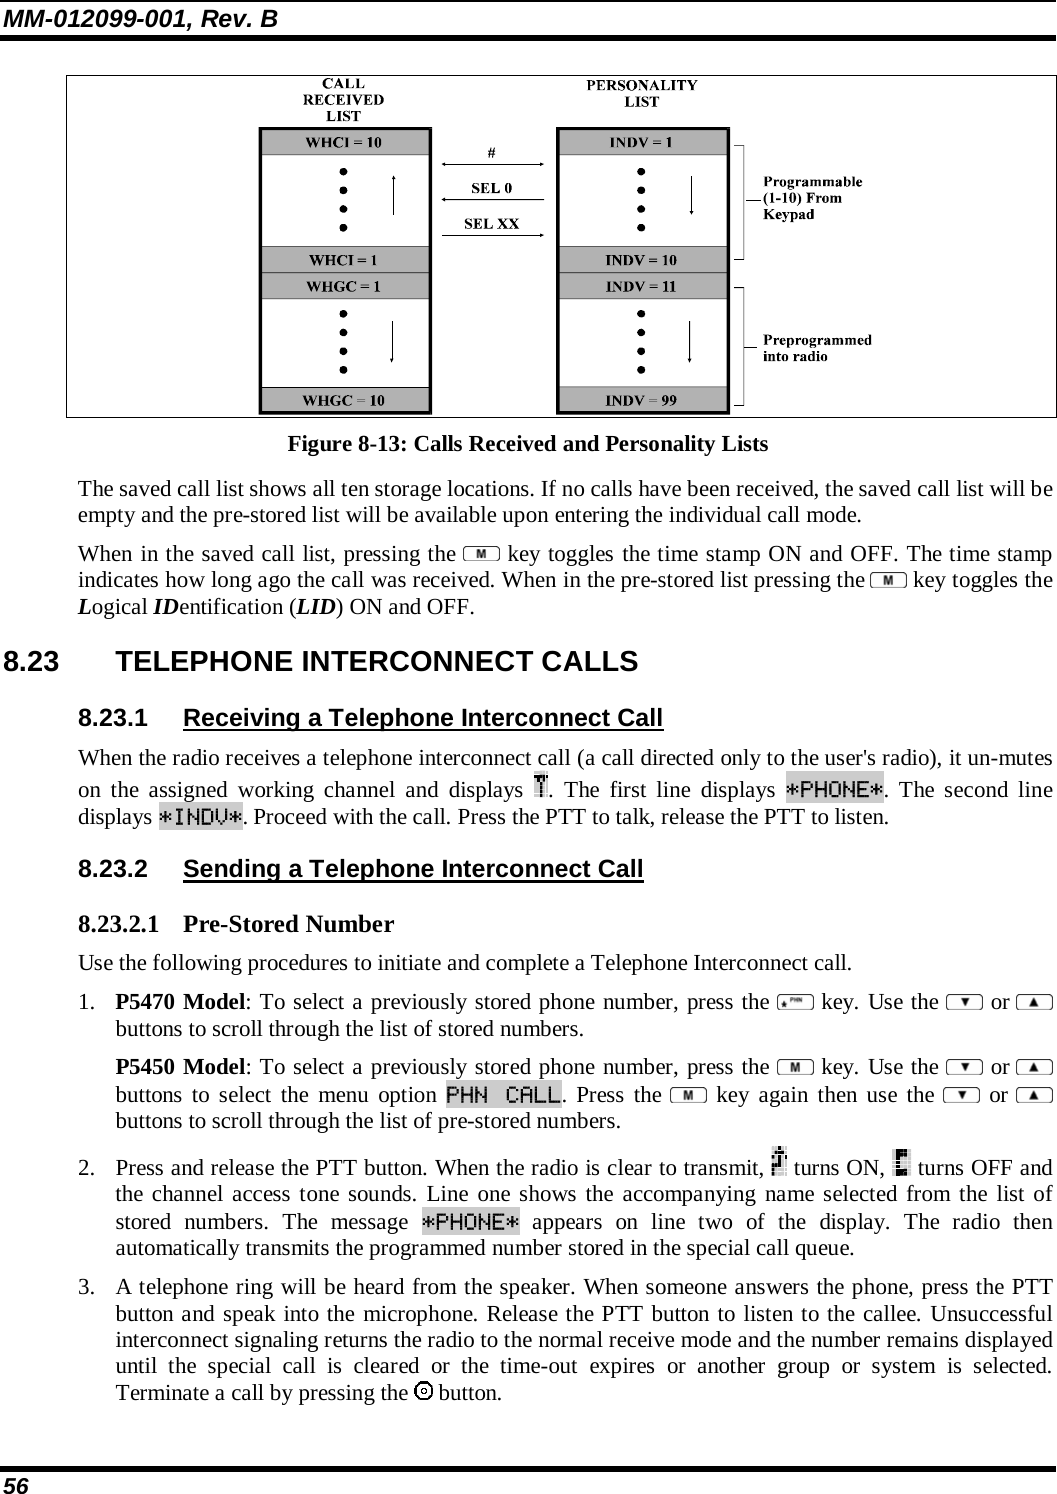 MM-012099-001, Rev. B 56  Figure 8-13: Calls Received and Personality Lists The saved call list shows all ten storage locations. If no calls have been received, the saved call list will be empty and the pre-stored list will be available upon entering the individual call mode.  When in the saved call list, pressing the   key toggles the time stamp ON and OFF. The time stamp indicates how long ago the call was received. When in the pre-stored list pressing the   key toggles the Logical IDentification (LID) ON and OFF. 8.23  TELEPHONE INTERCONNECT CALLS 8.23.1  Receiving a Telephone Interconnect Call When the radio receives a telephone interconnect call (a call directed only to the user&apos;s radio), it un-mutes on the assigned working channel and displays  . The first line displays *PHONE*. The second line displays *INDV*. Proceed with the call. Press the PTT to talk, release the PTT to listen. 8.23.2  Sending a Telephone Interconnect Call 8.23.2.1 Pre-Stored Number Use the following procedures to initiate and complete a Telephone Interconnect call.  1. P5470 Model: To select a previously stored phone number, press the   key. Use the   or  buttons to scroll through the list of stored numbers.  P5450 Model: To select a previously stored phone number, press the   key. Use the   or  buttons to select the menu option PHN CALL. Press the   key again then use the   or  buttons to scroll through the list of pre-stored numbers.  2. Press and release the PTT button. When the radio is clear to transmit,   turns ON,   turns OFF and the channel access tone sounds. Line one shows the accompanying name selected from the list of stored numbers. The message *PHONE* appears on line two of the display. The radio then automatically transmits the programmed number stored in the special call queue.  3. A telephone ring will be heard from the speaker. When someone answers the phone, press the PTT button and speak into the microphone. Release the PTT button to listen to the callee. Unsuccessful interconnect signaling returns the radio to the normal receive mode and the number remains displayed until the special call is cleared or the time-out expires or another group or system is selected. Terminate a call by pressing the   button. 